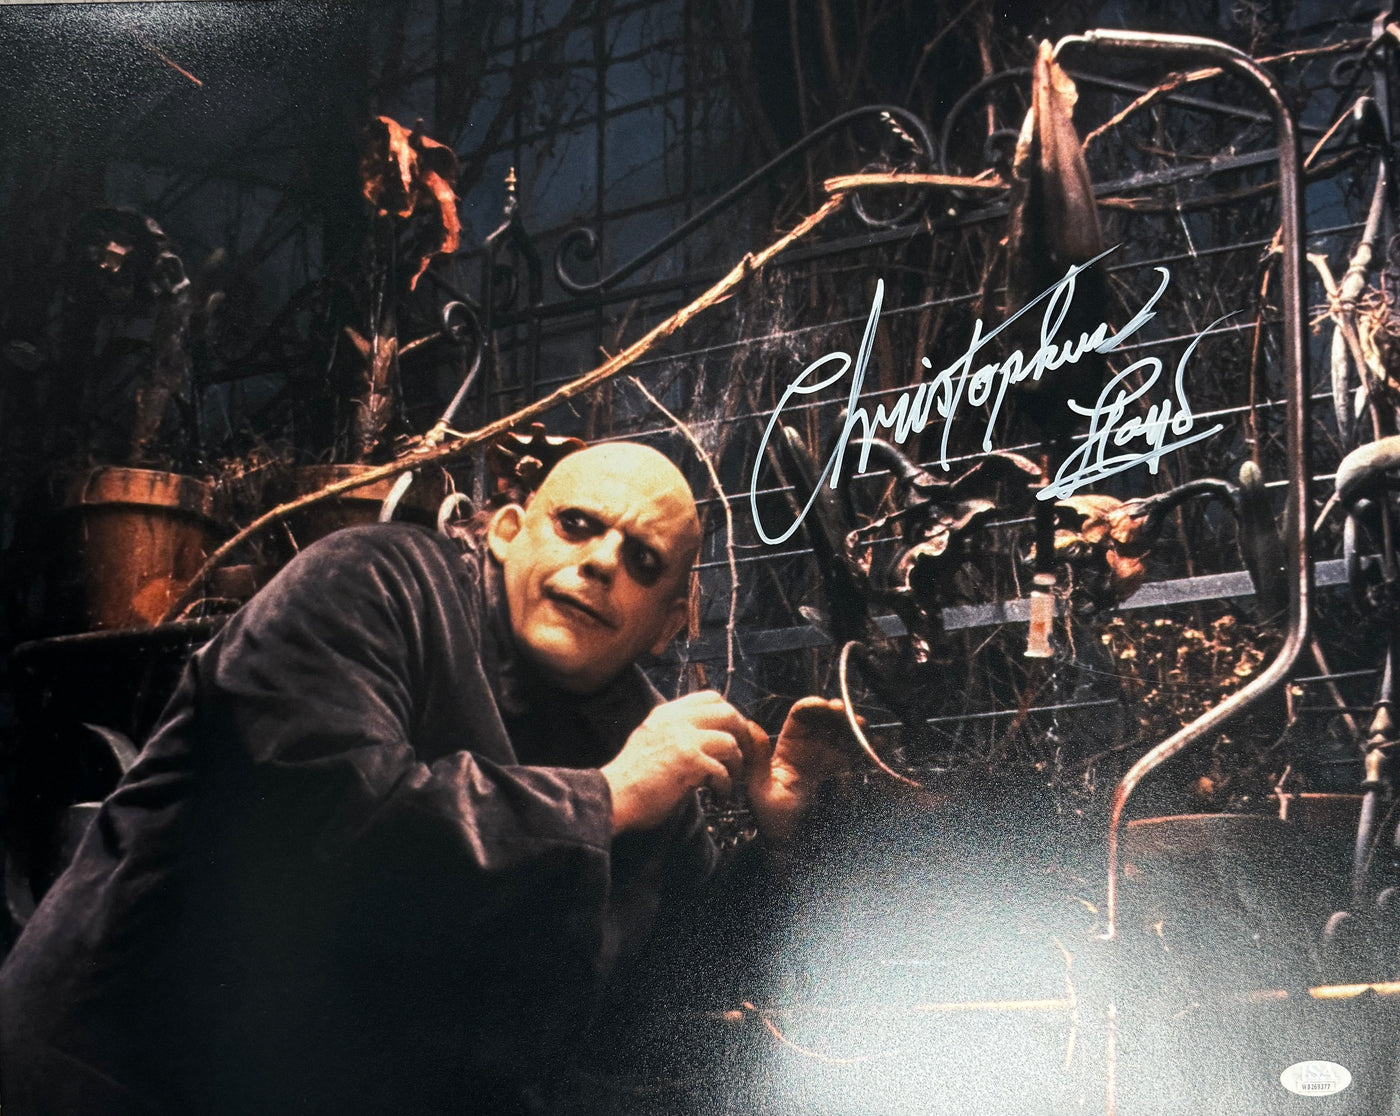 Christopher Lloyd Signed 16x20 Photo The Addams Family Autographed JSA COA